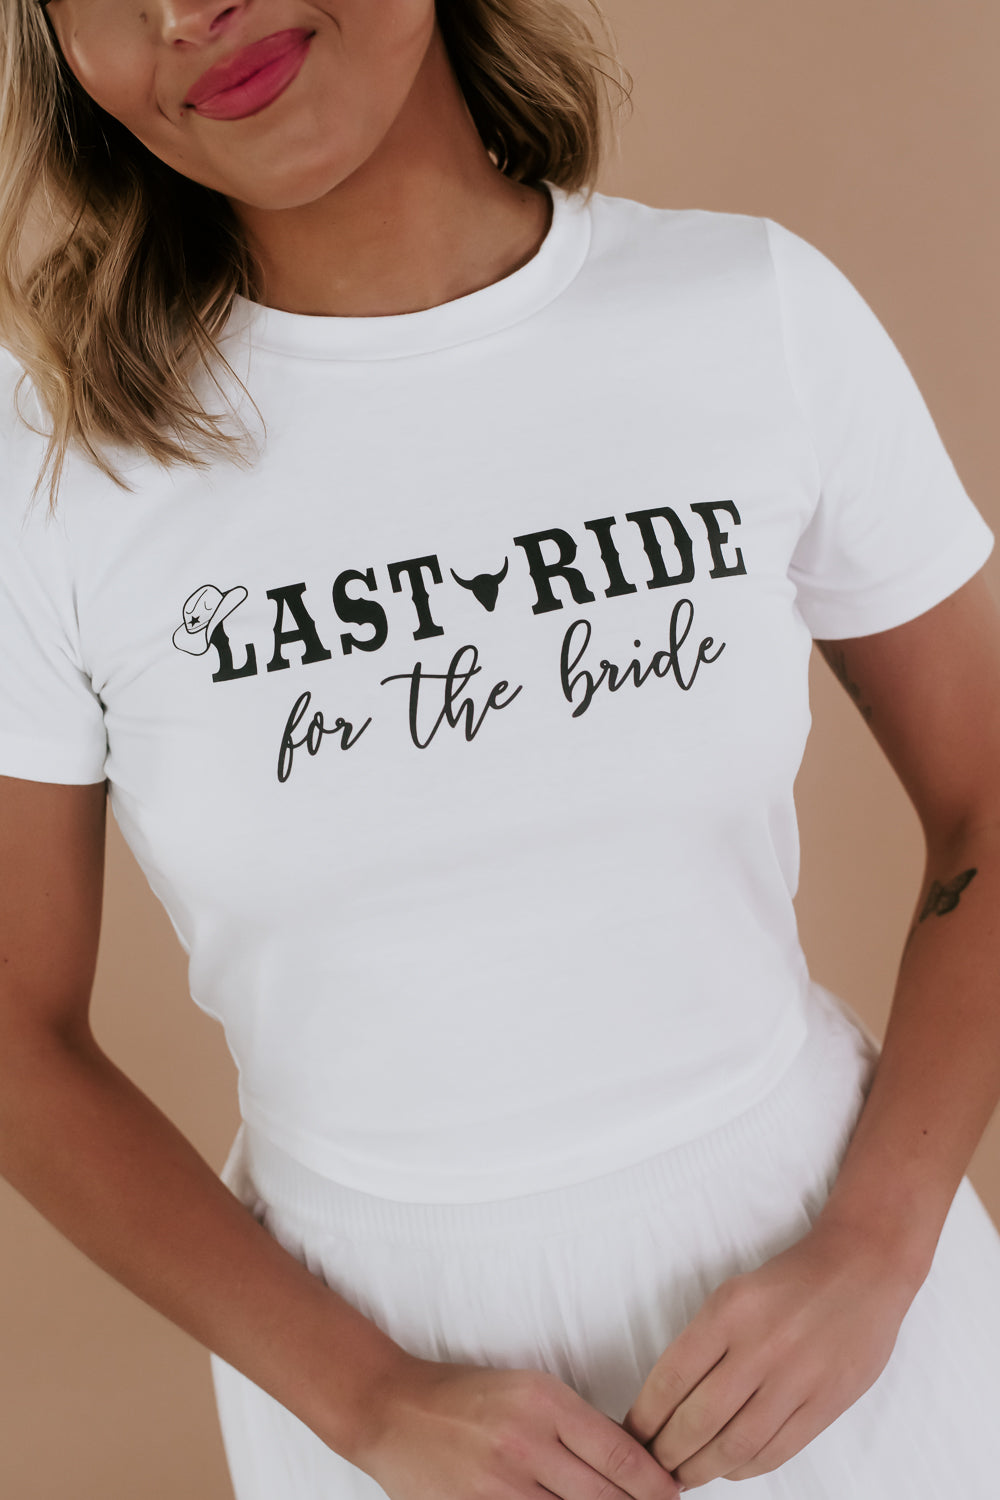 Last Ride For The Bride Baby Tee, White